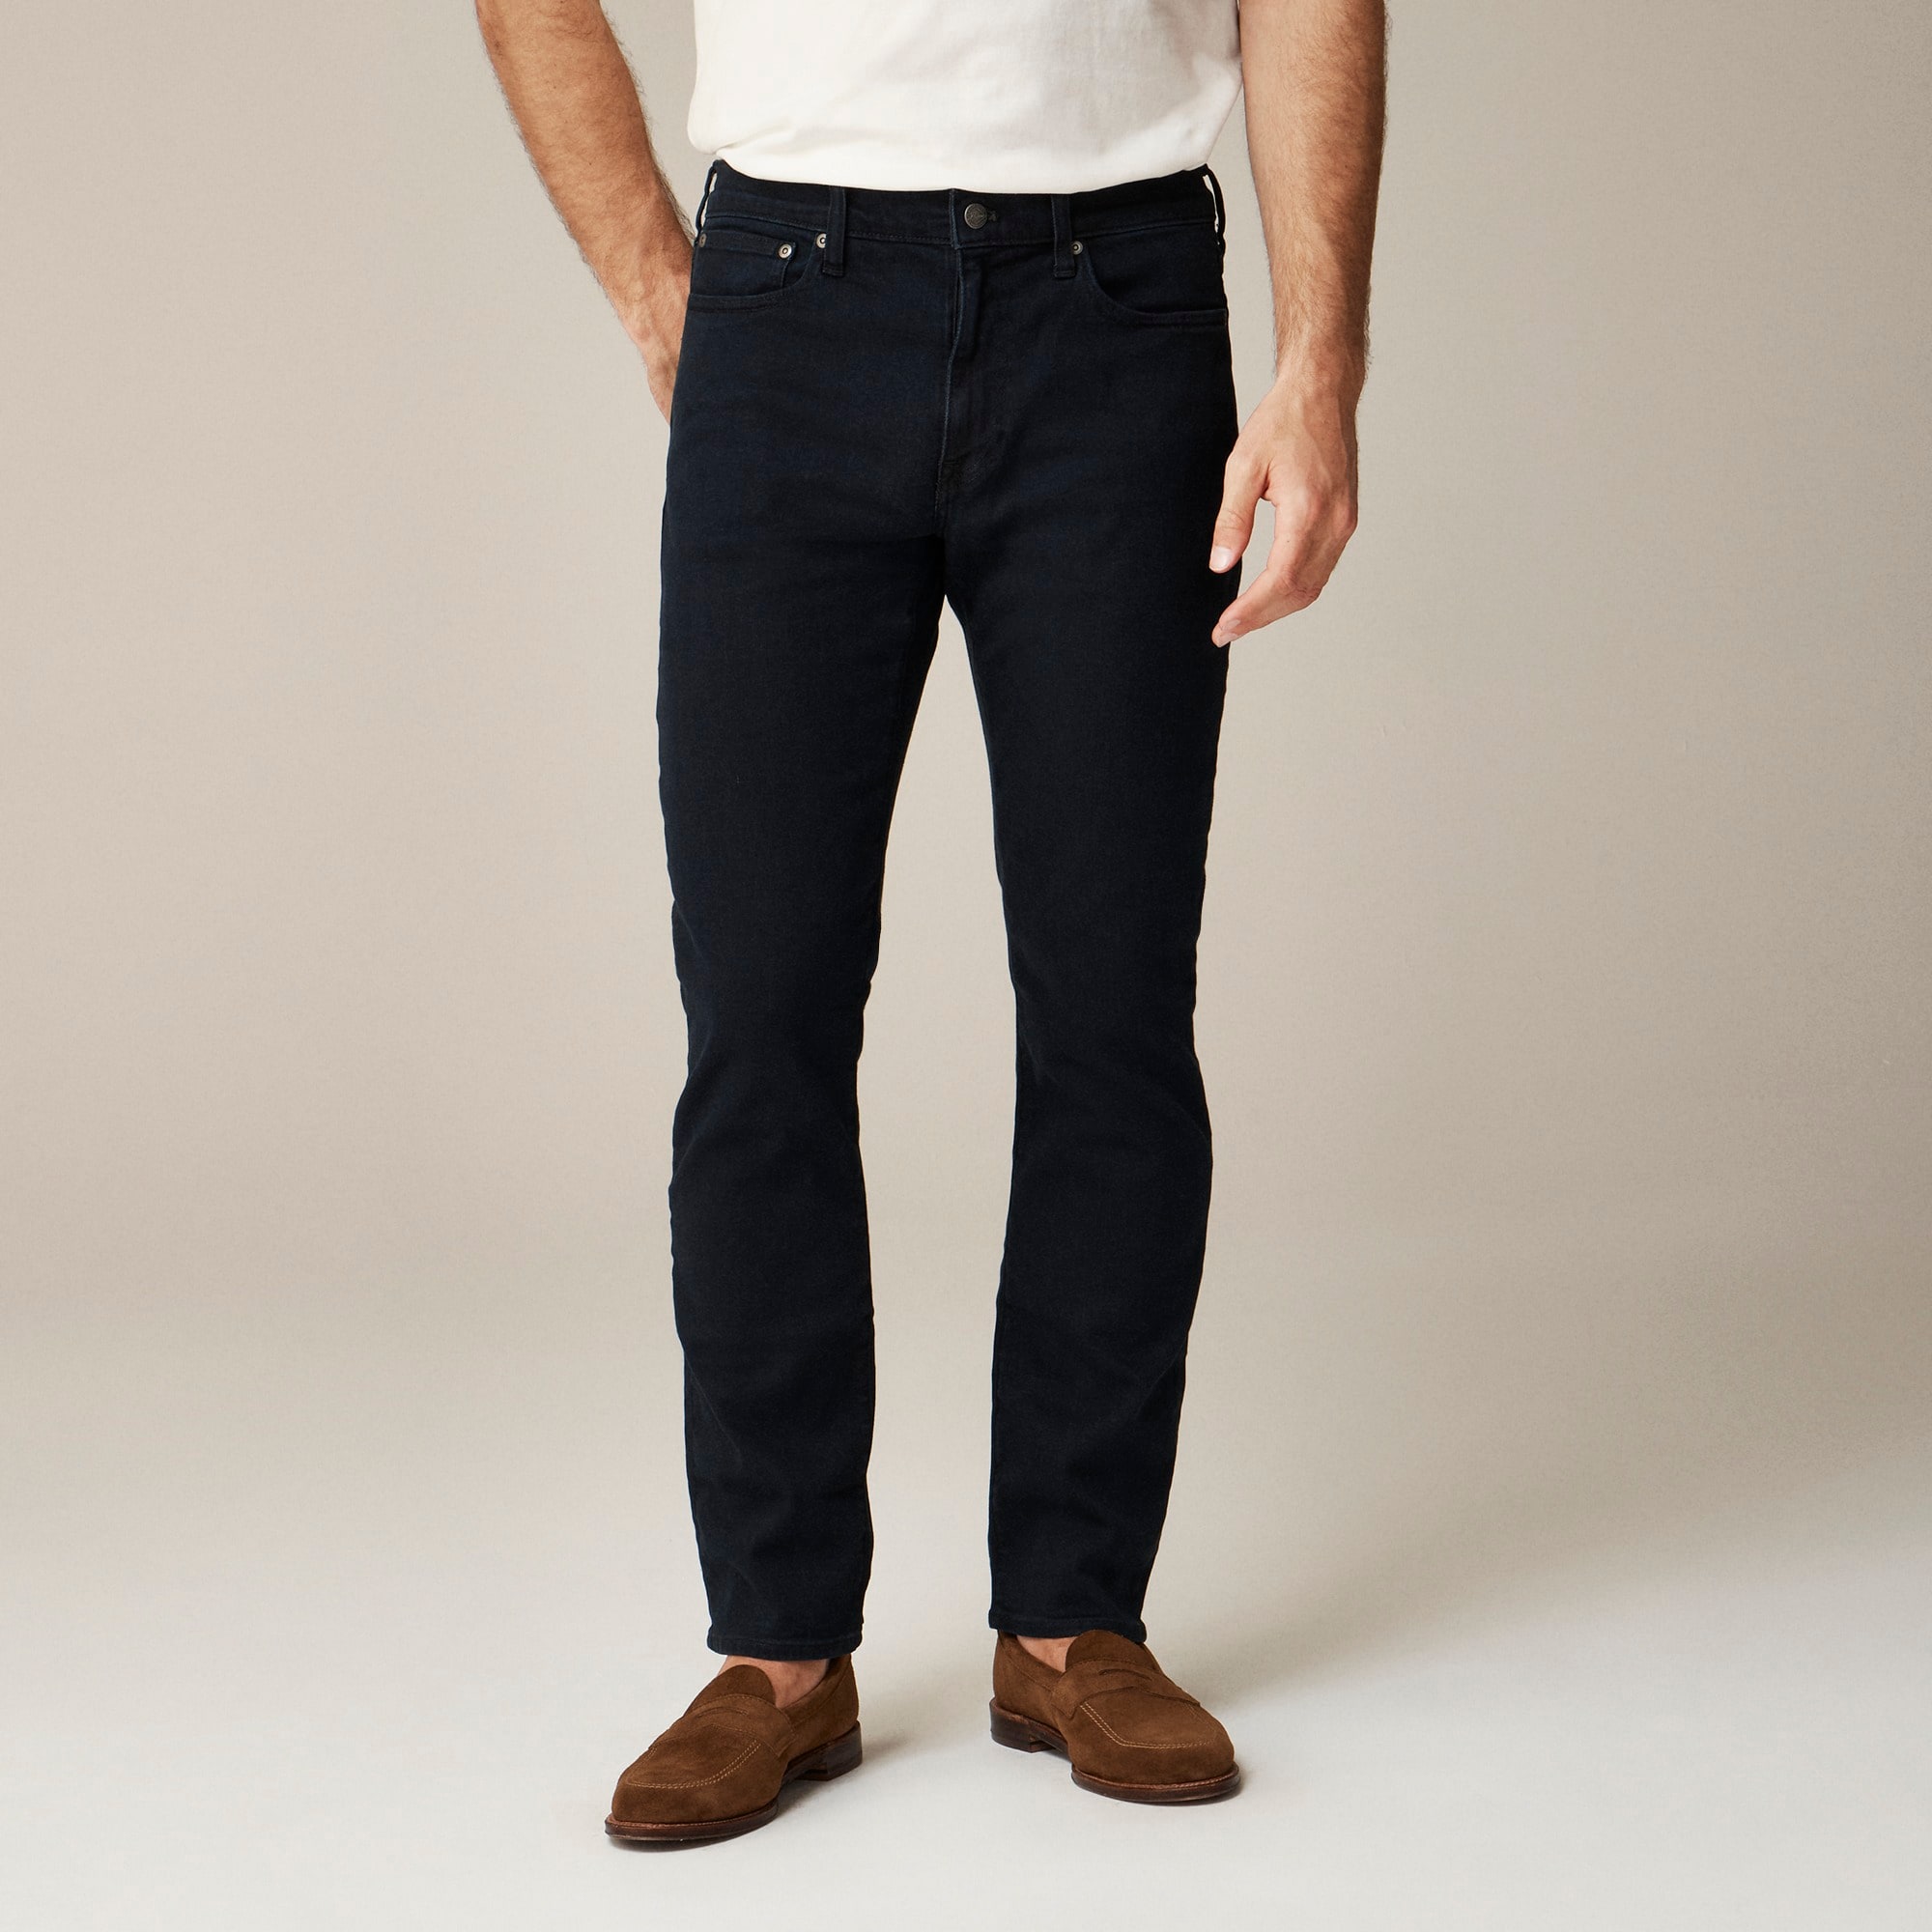  770™ Straight-fit stretch jean in deep lake wash